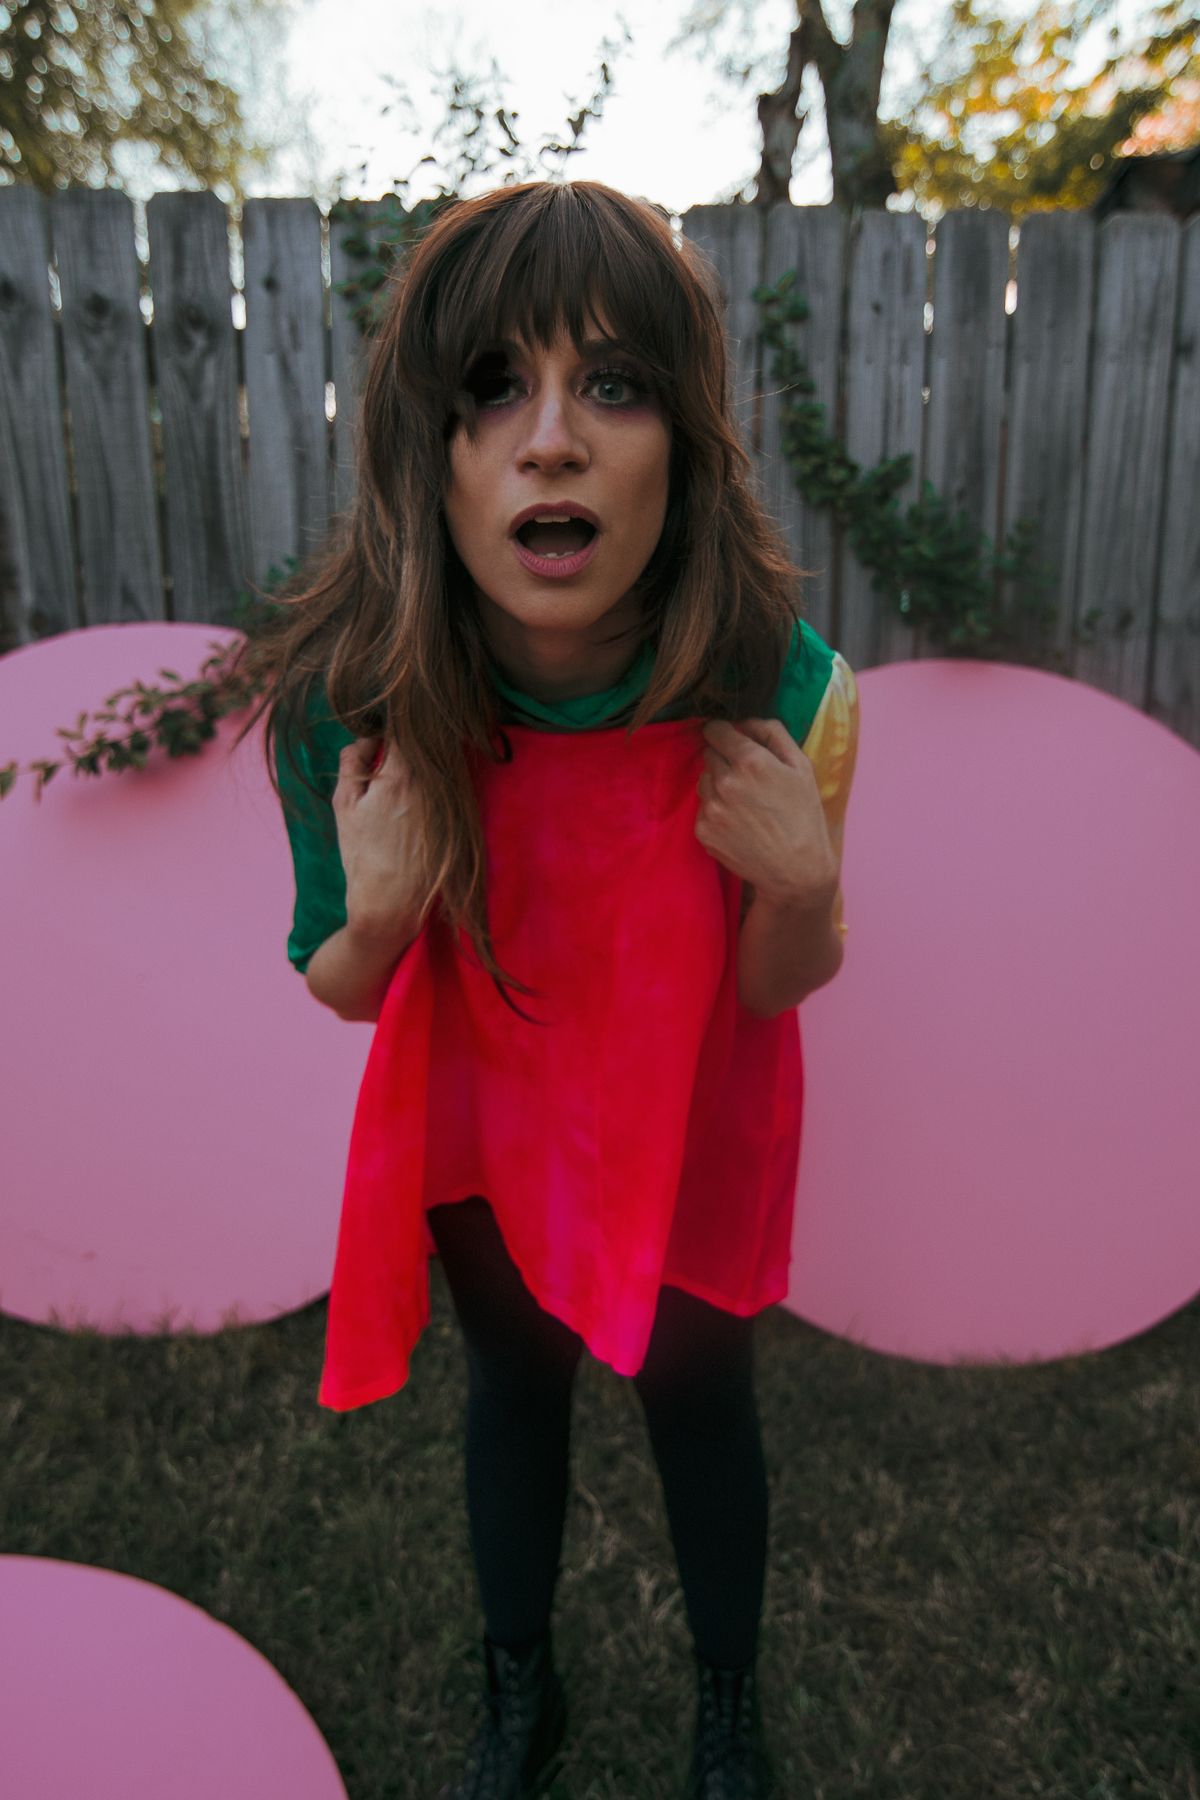 Nicole Atkins, whose new EP is titled "Italian Ice," performs at Lucky You Lounge on Thursday.  (Cait Brady)